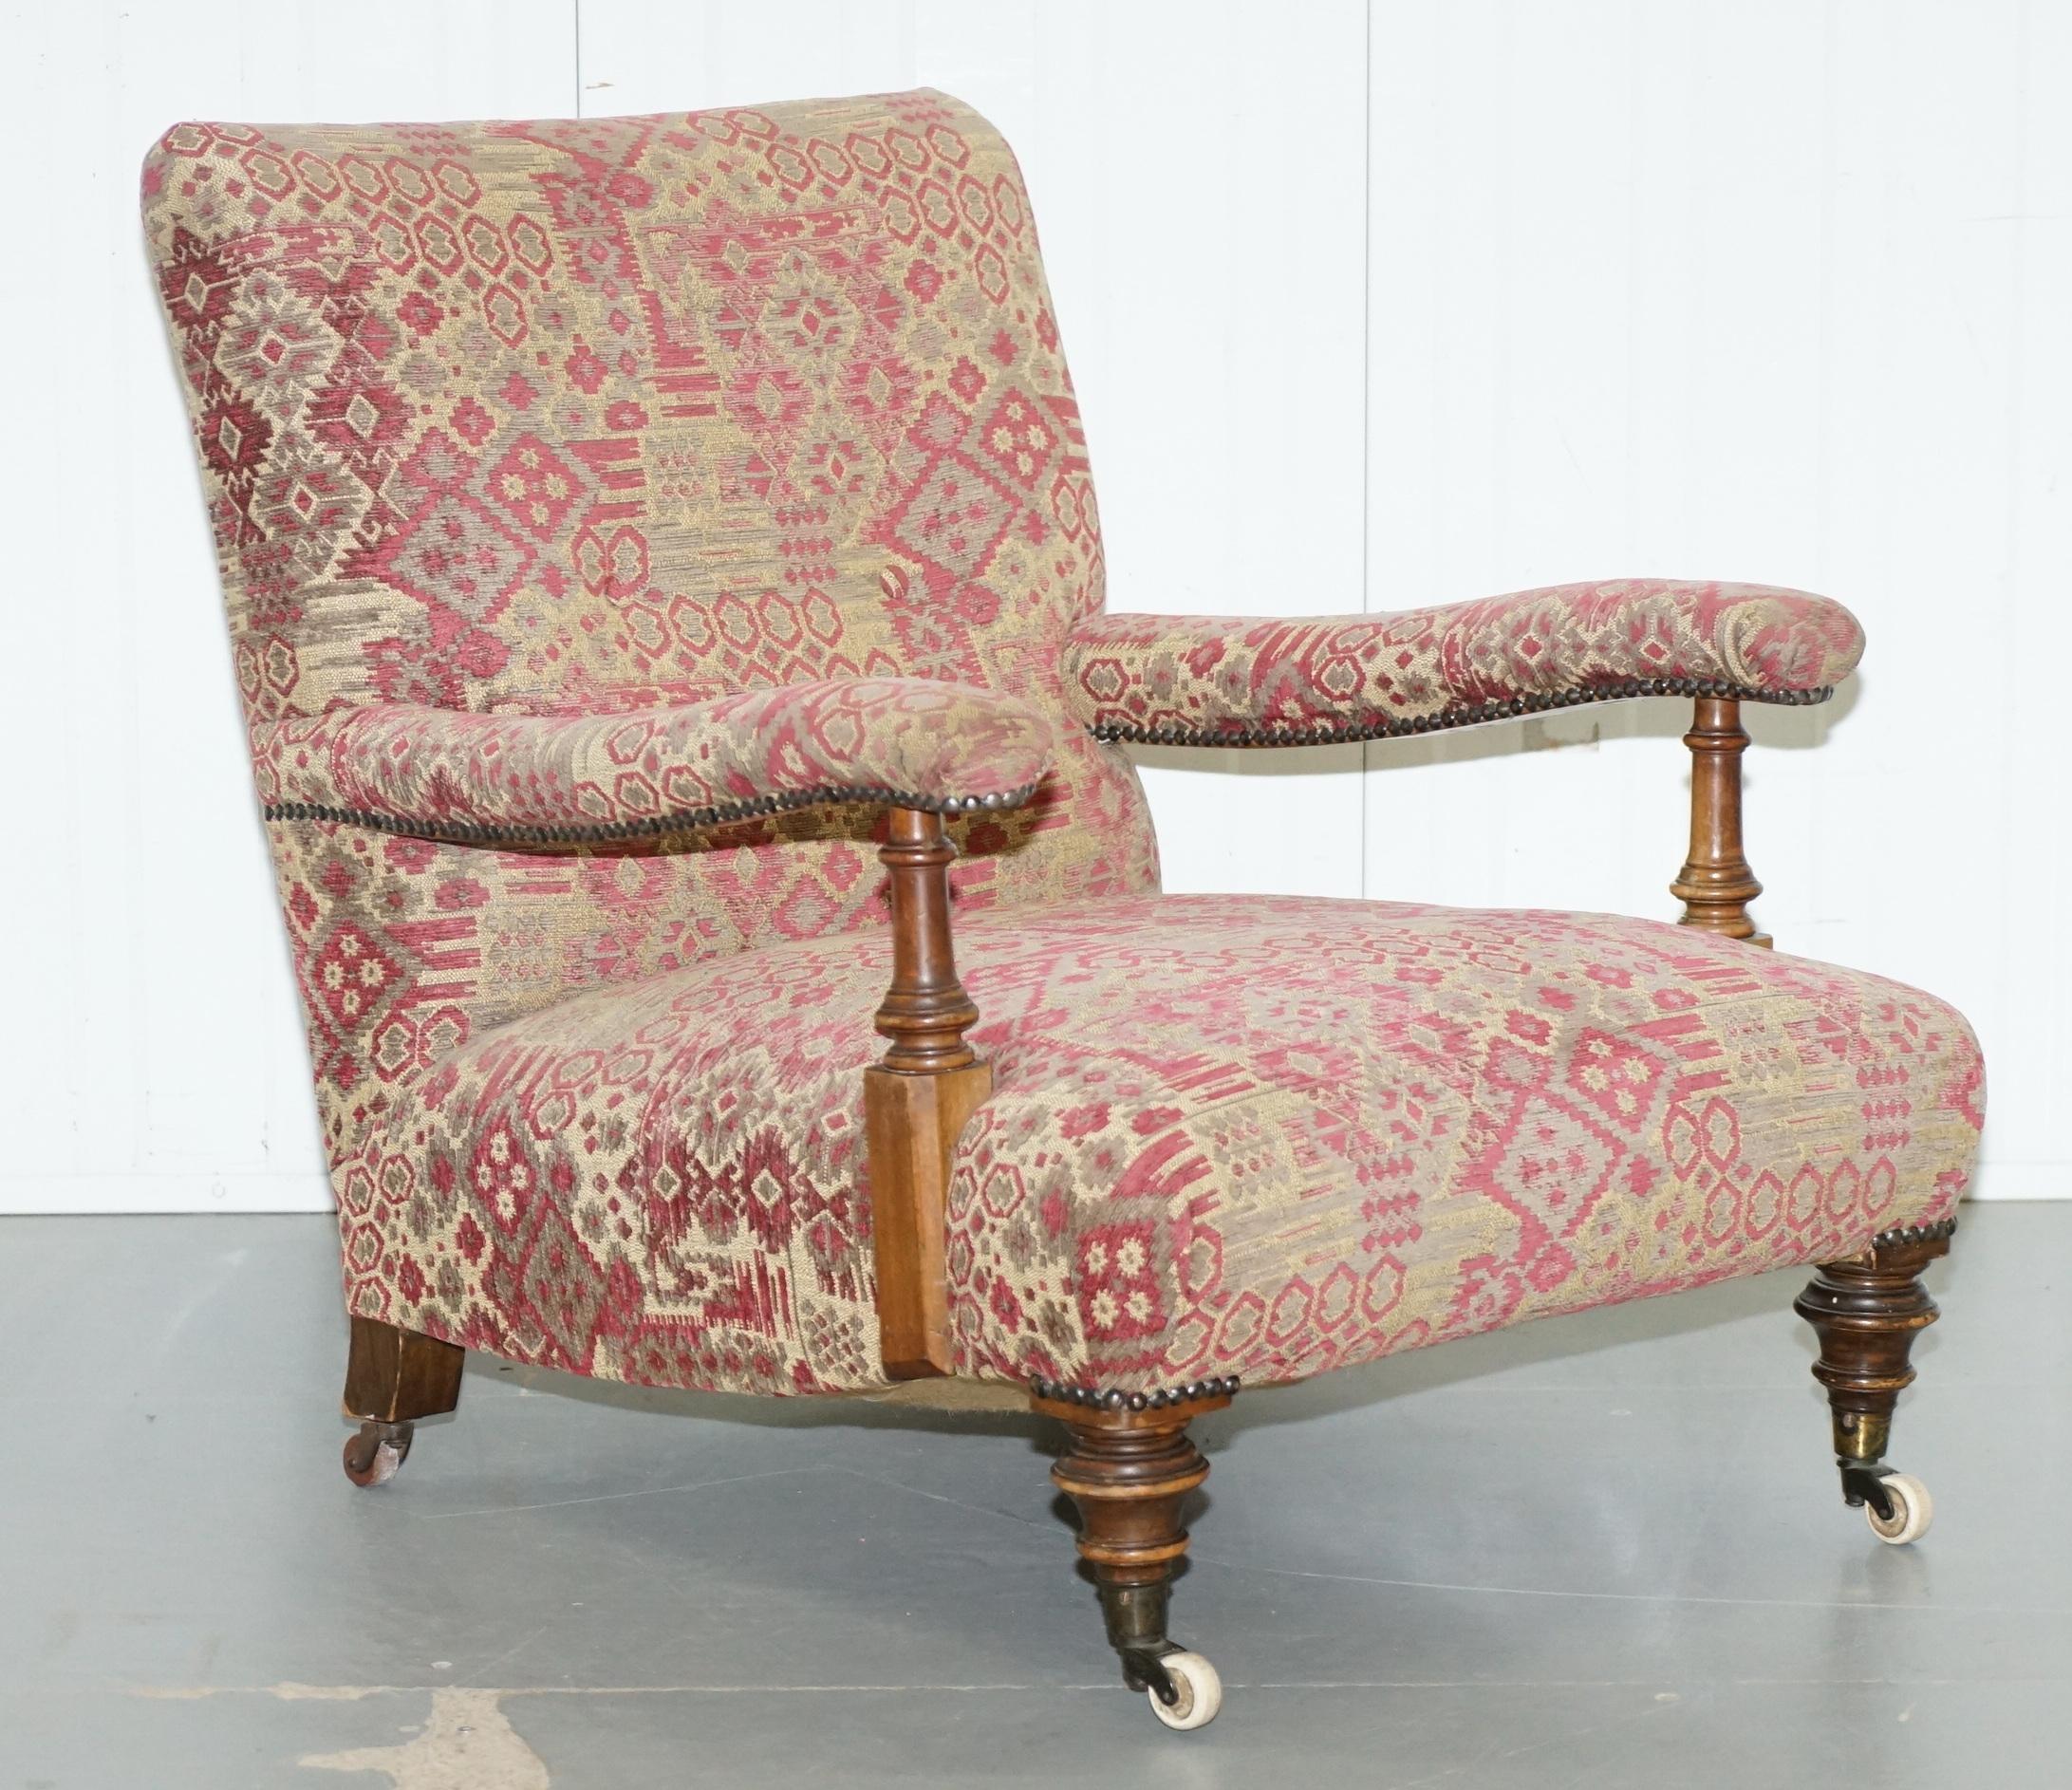 We are delighted to offer for sale this lovely original Victorian Walnut framed Kilim upholstered Howard Library reading armchair

A very good looking and well-made piece, very rare to find in original Kilim upholstery, this is a Howard model